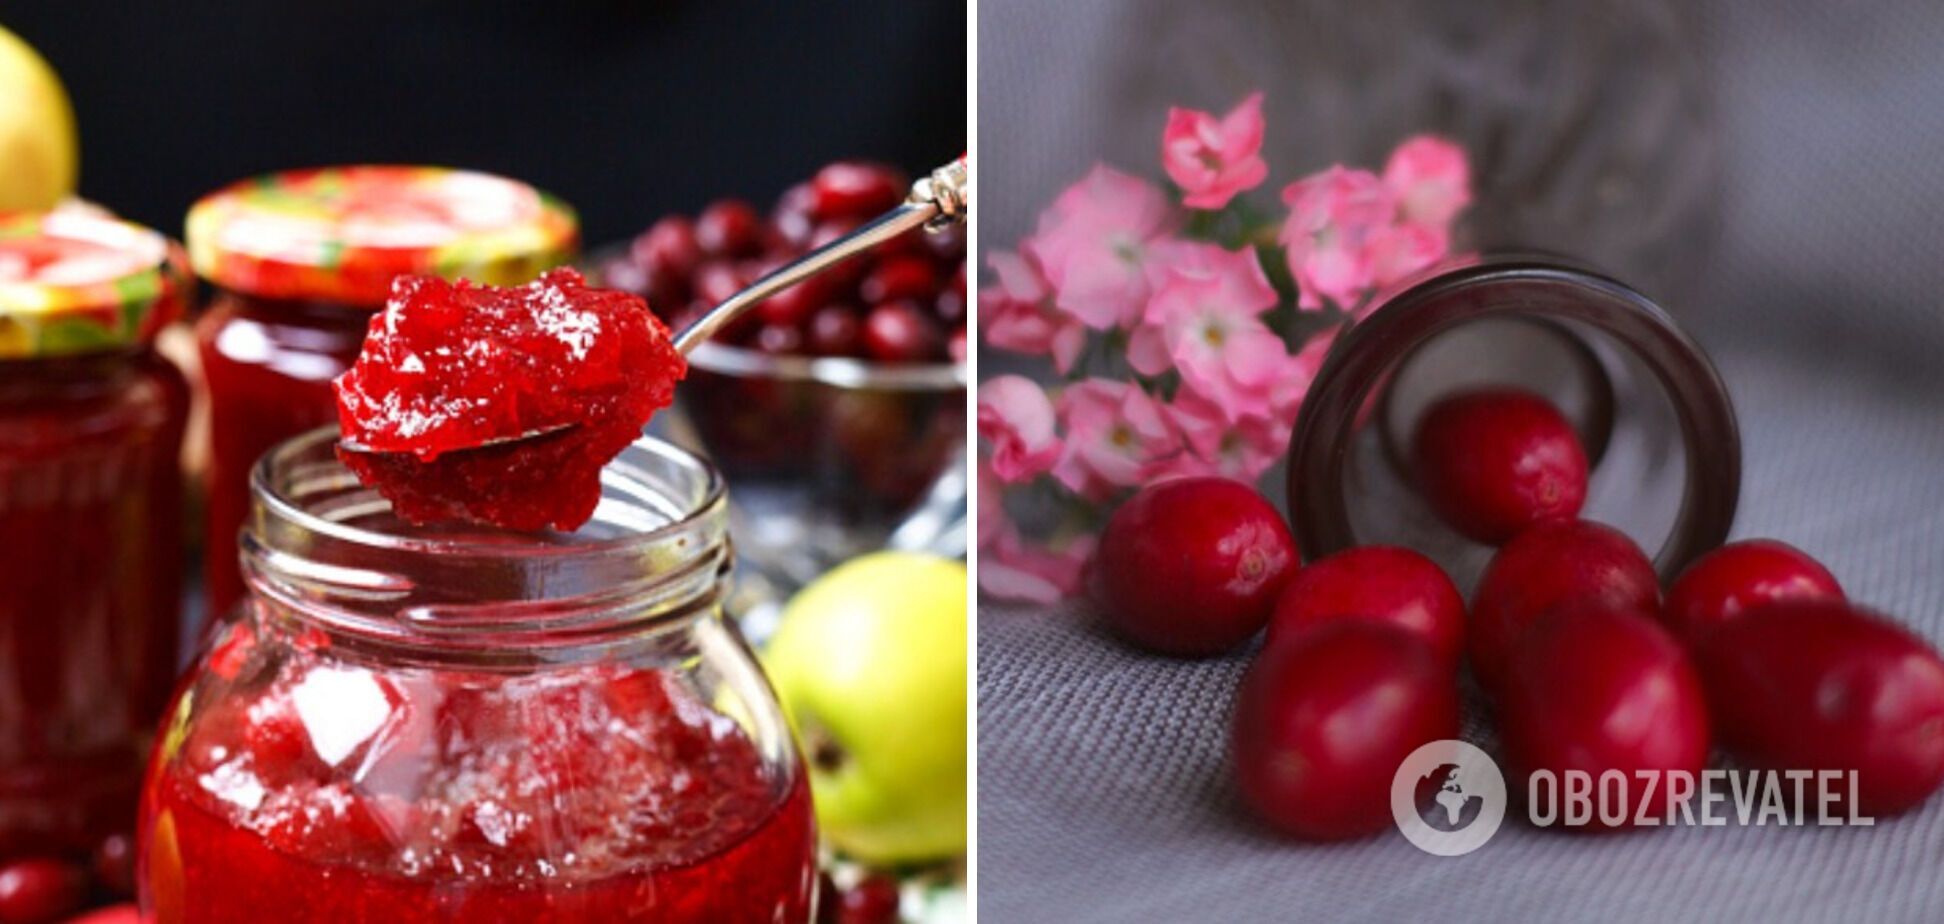 Jam with a minimum of sugar: how to make preservation healthier